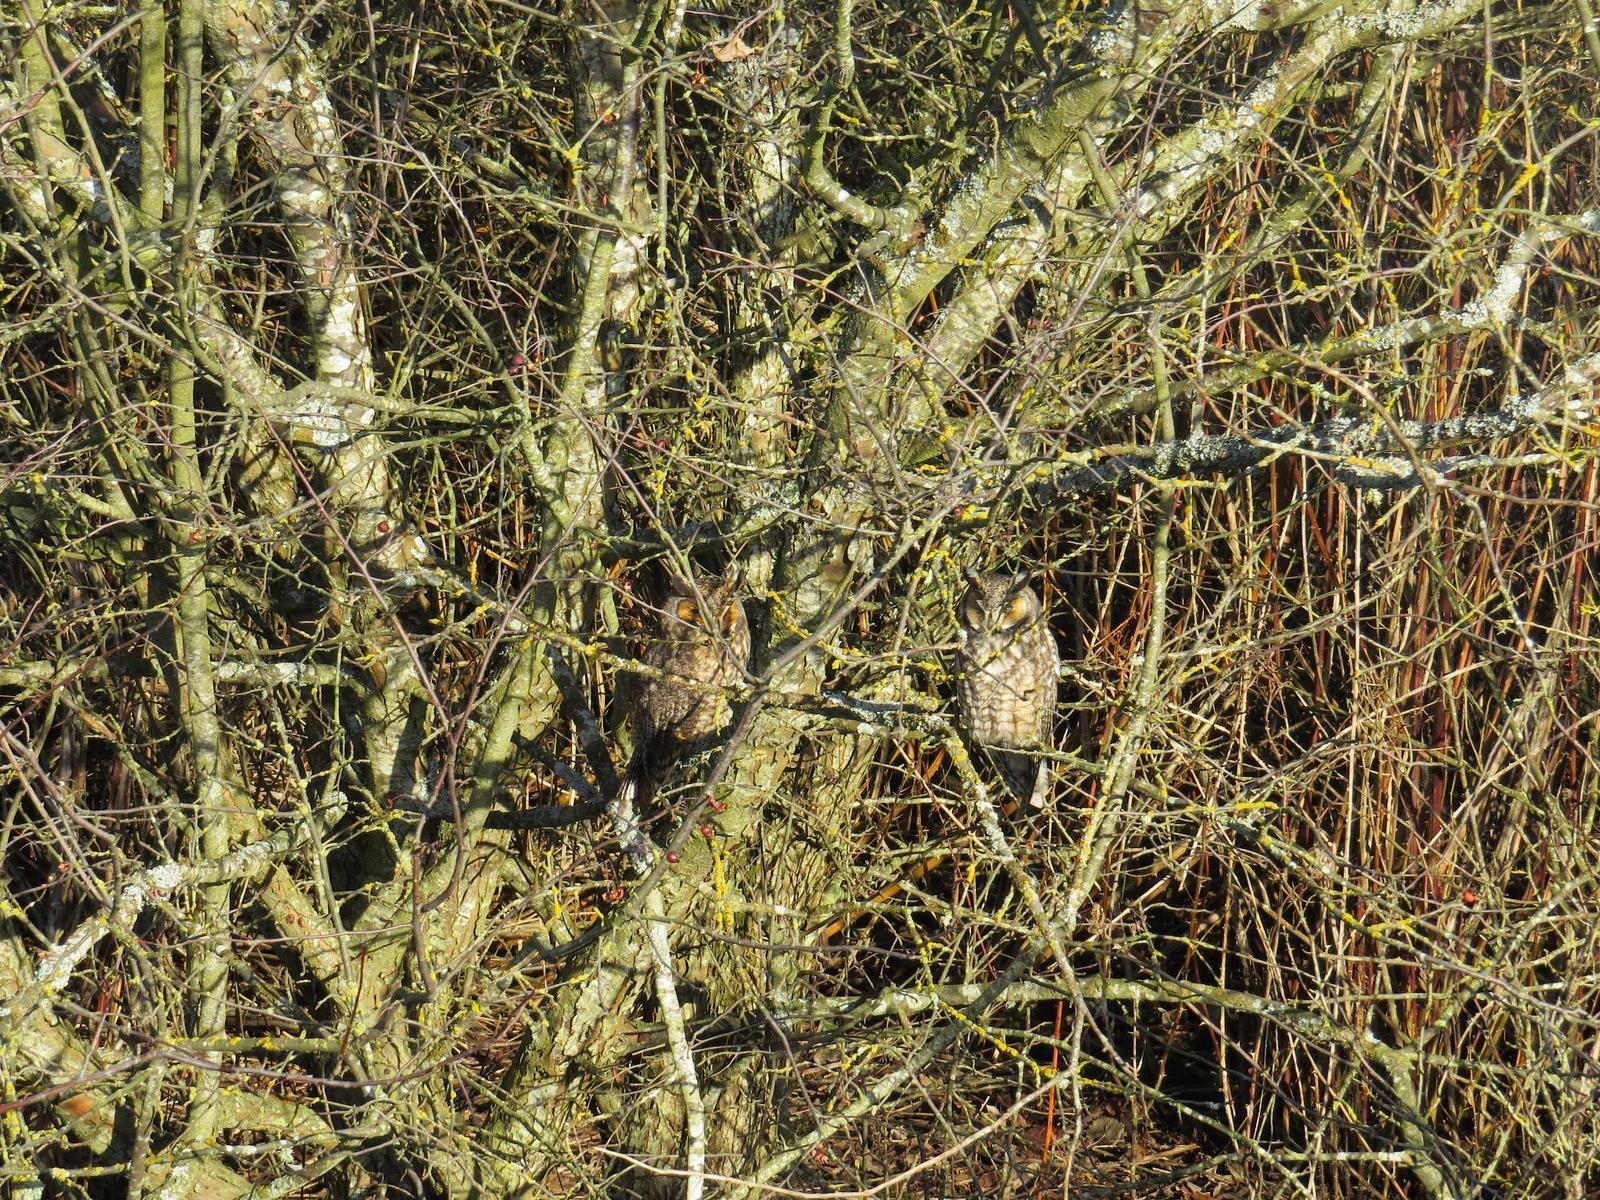 Long-eared Owl Photo by Brian Avent